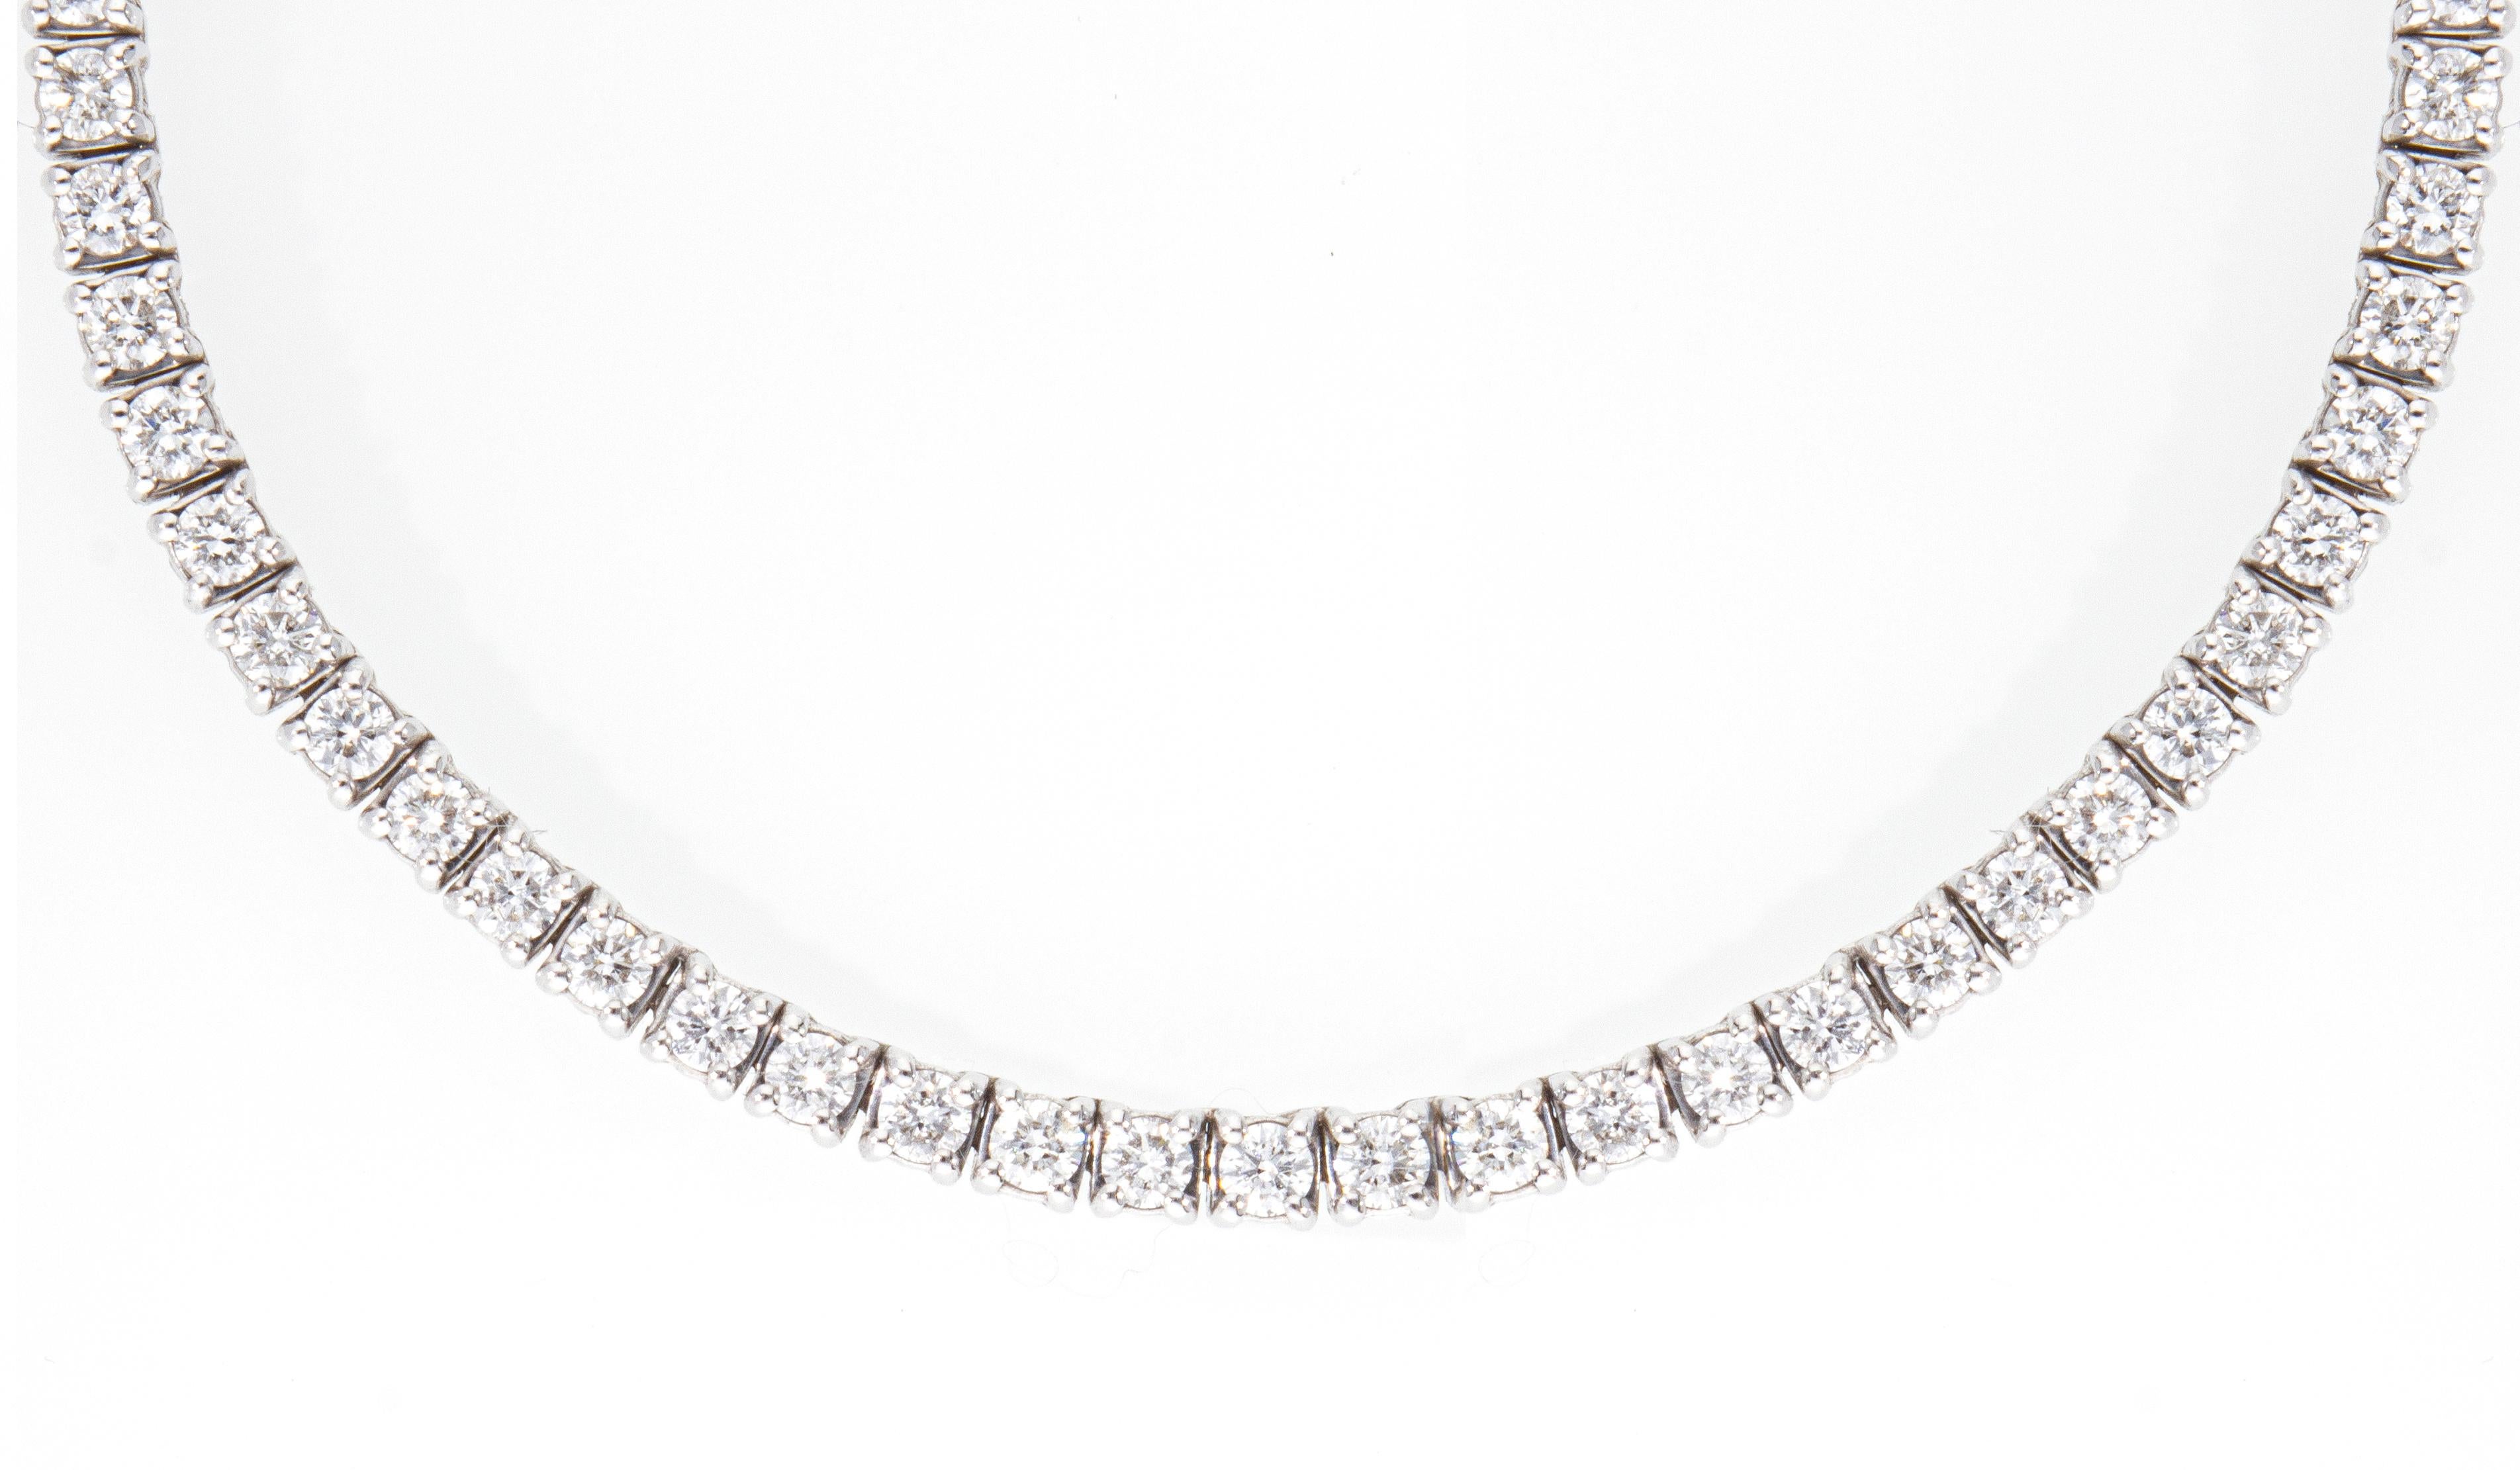 Necklace with 154 Brilliant Cut Diamonds, Total Carat Weight Ct 4.41 For Sale 7